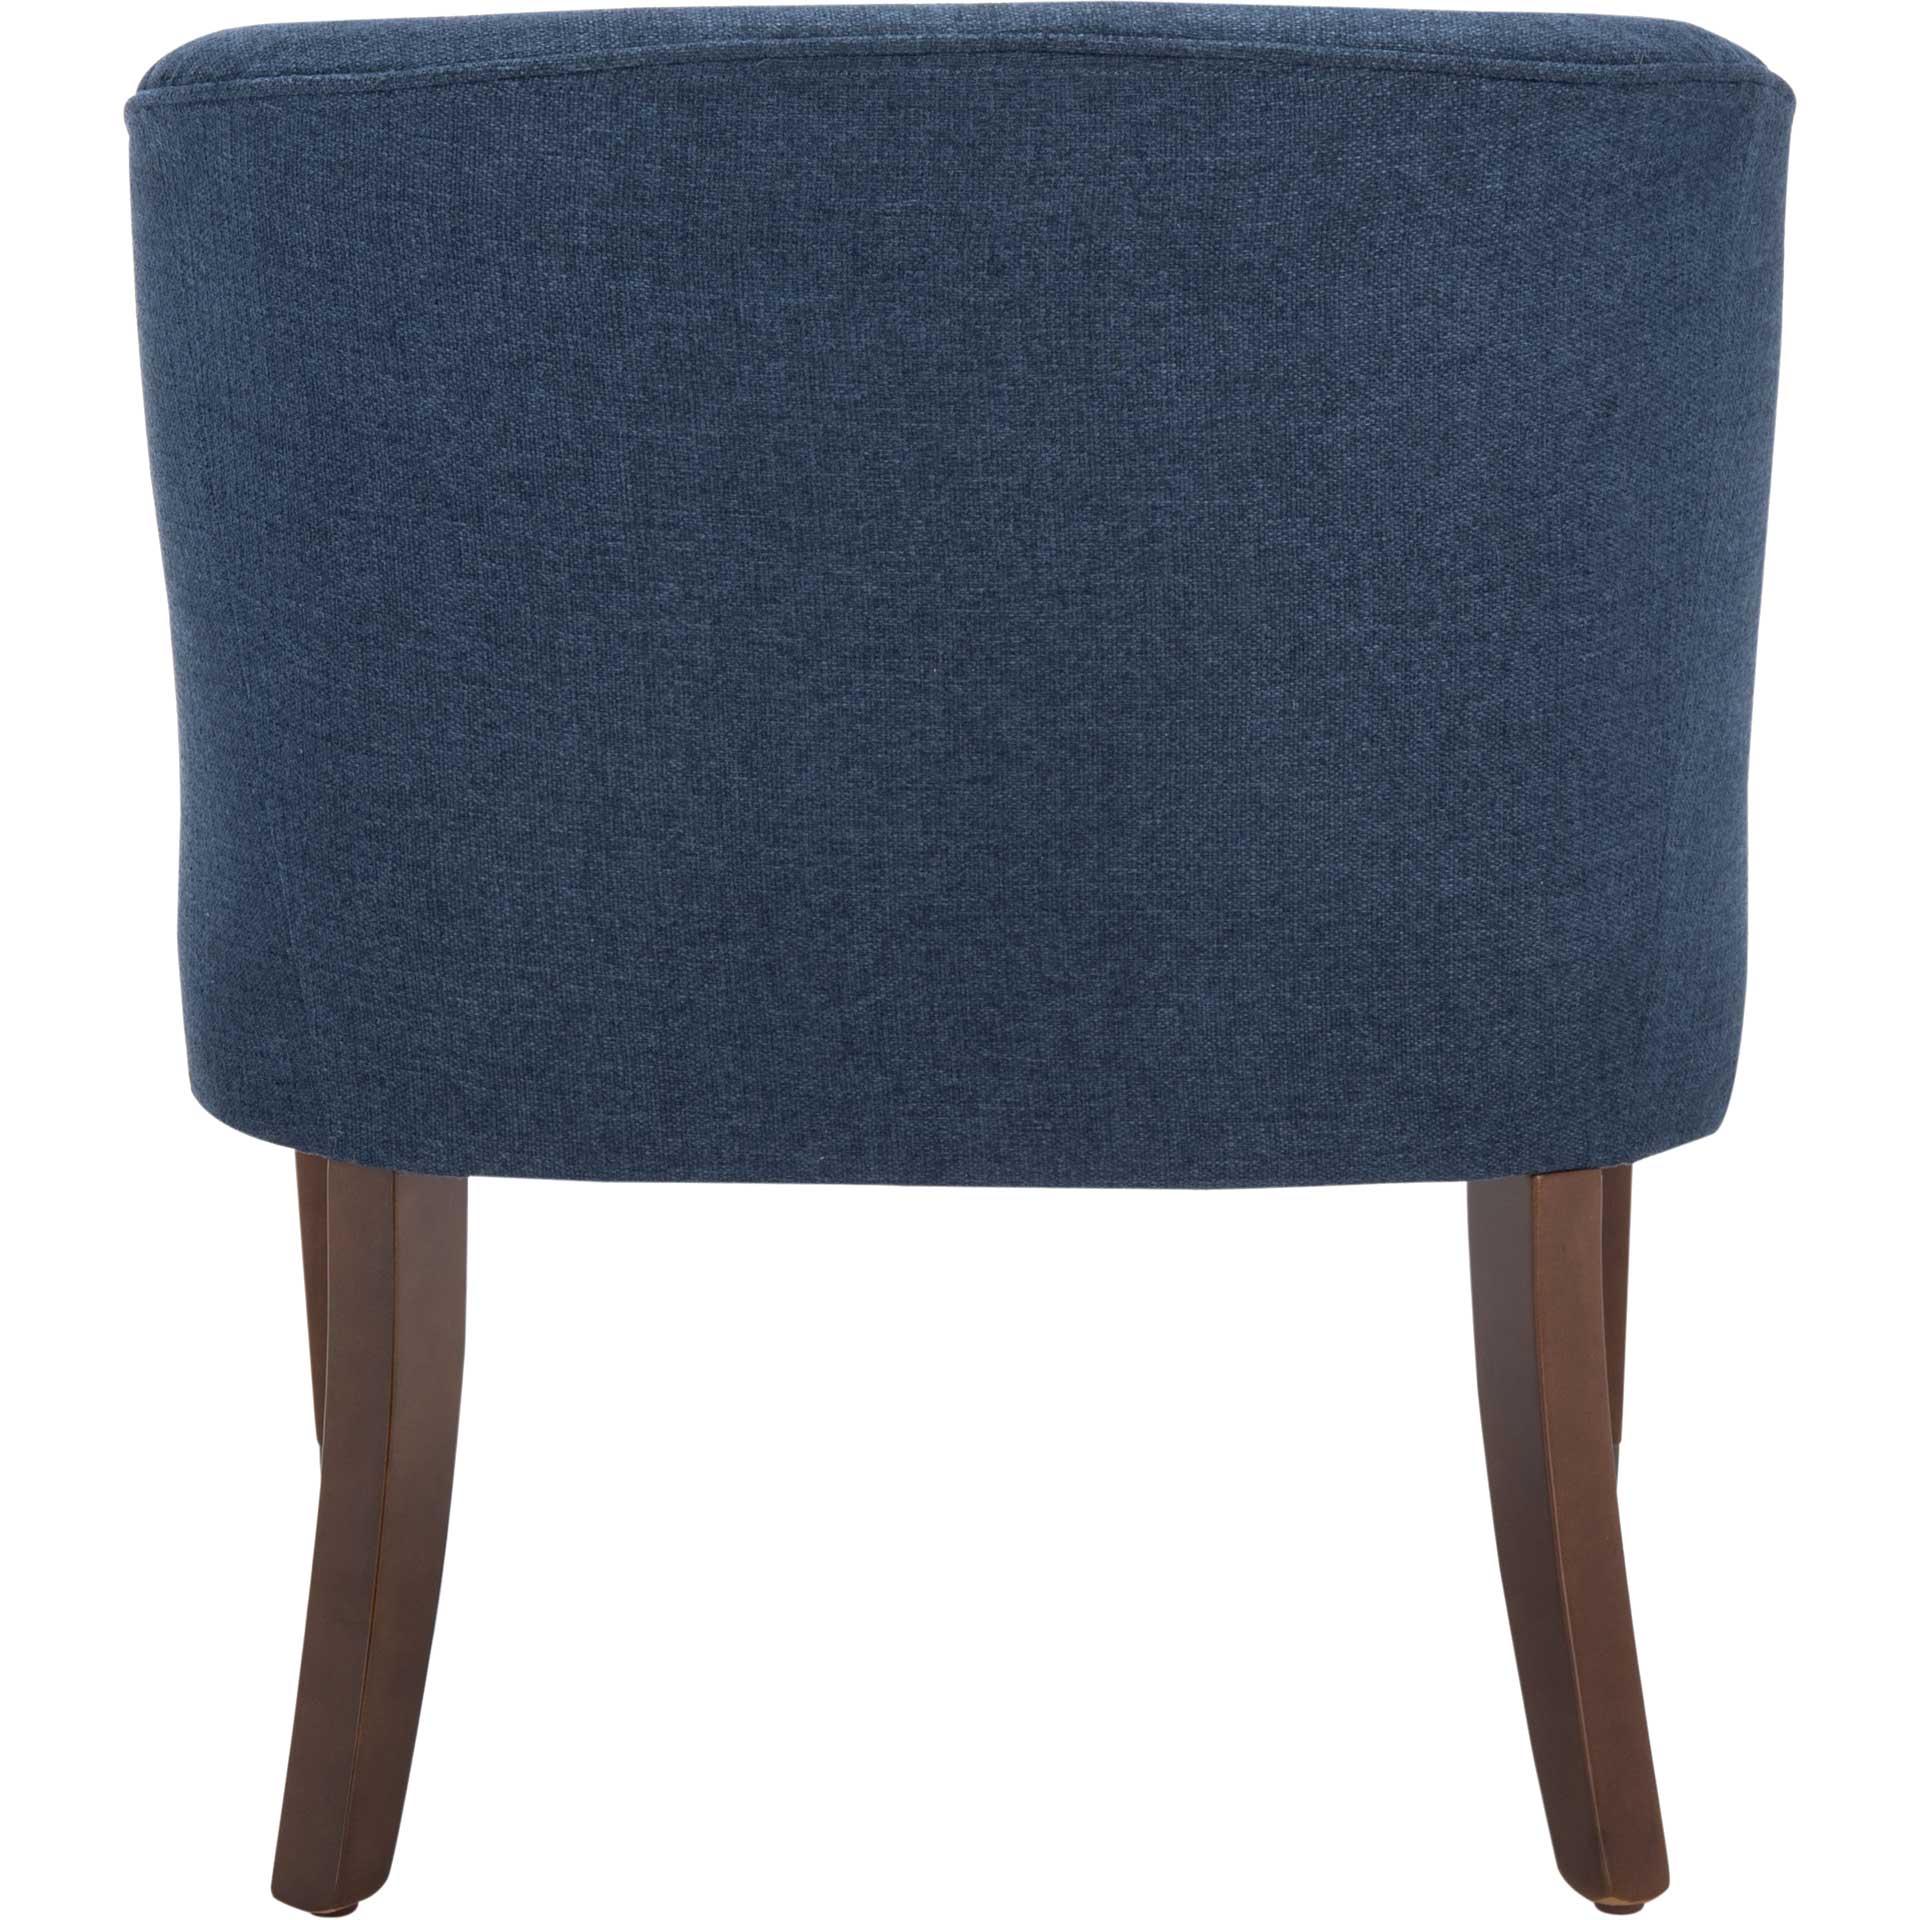 Ibaad Accent Chair Navy